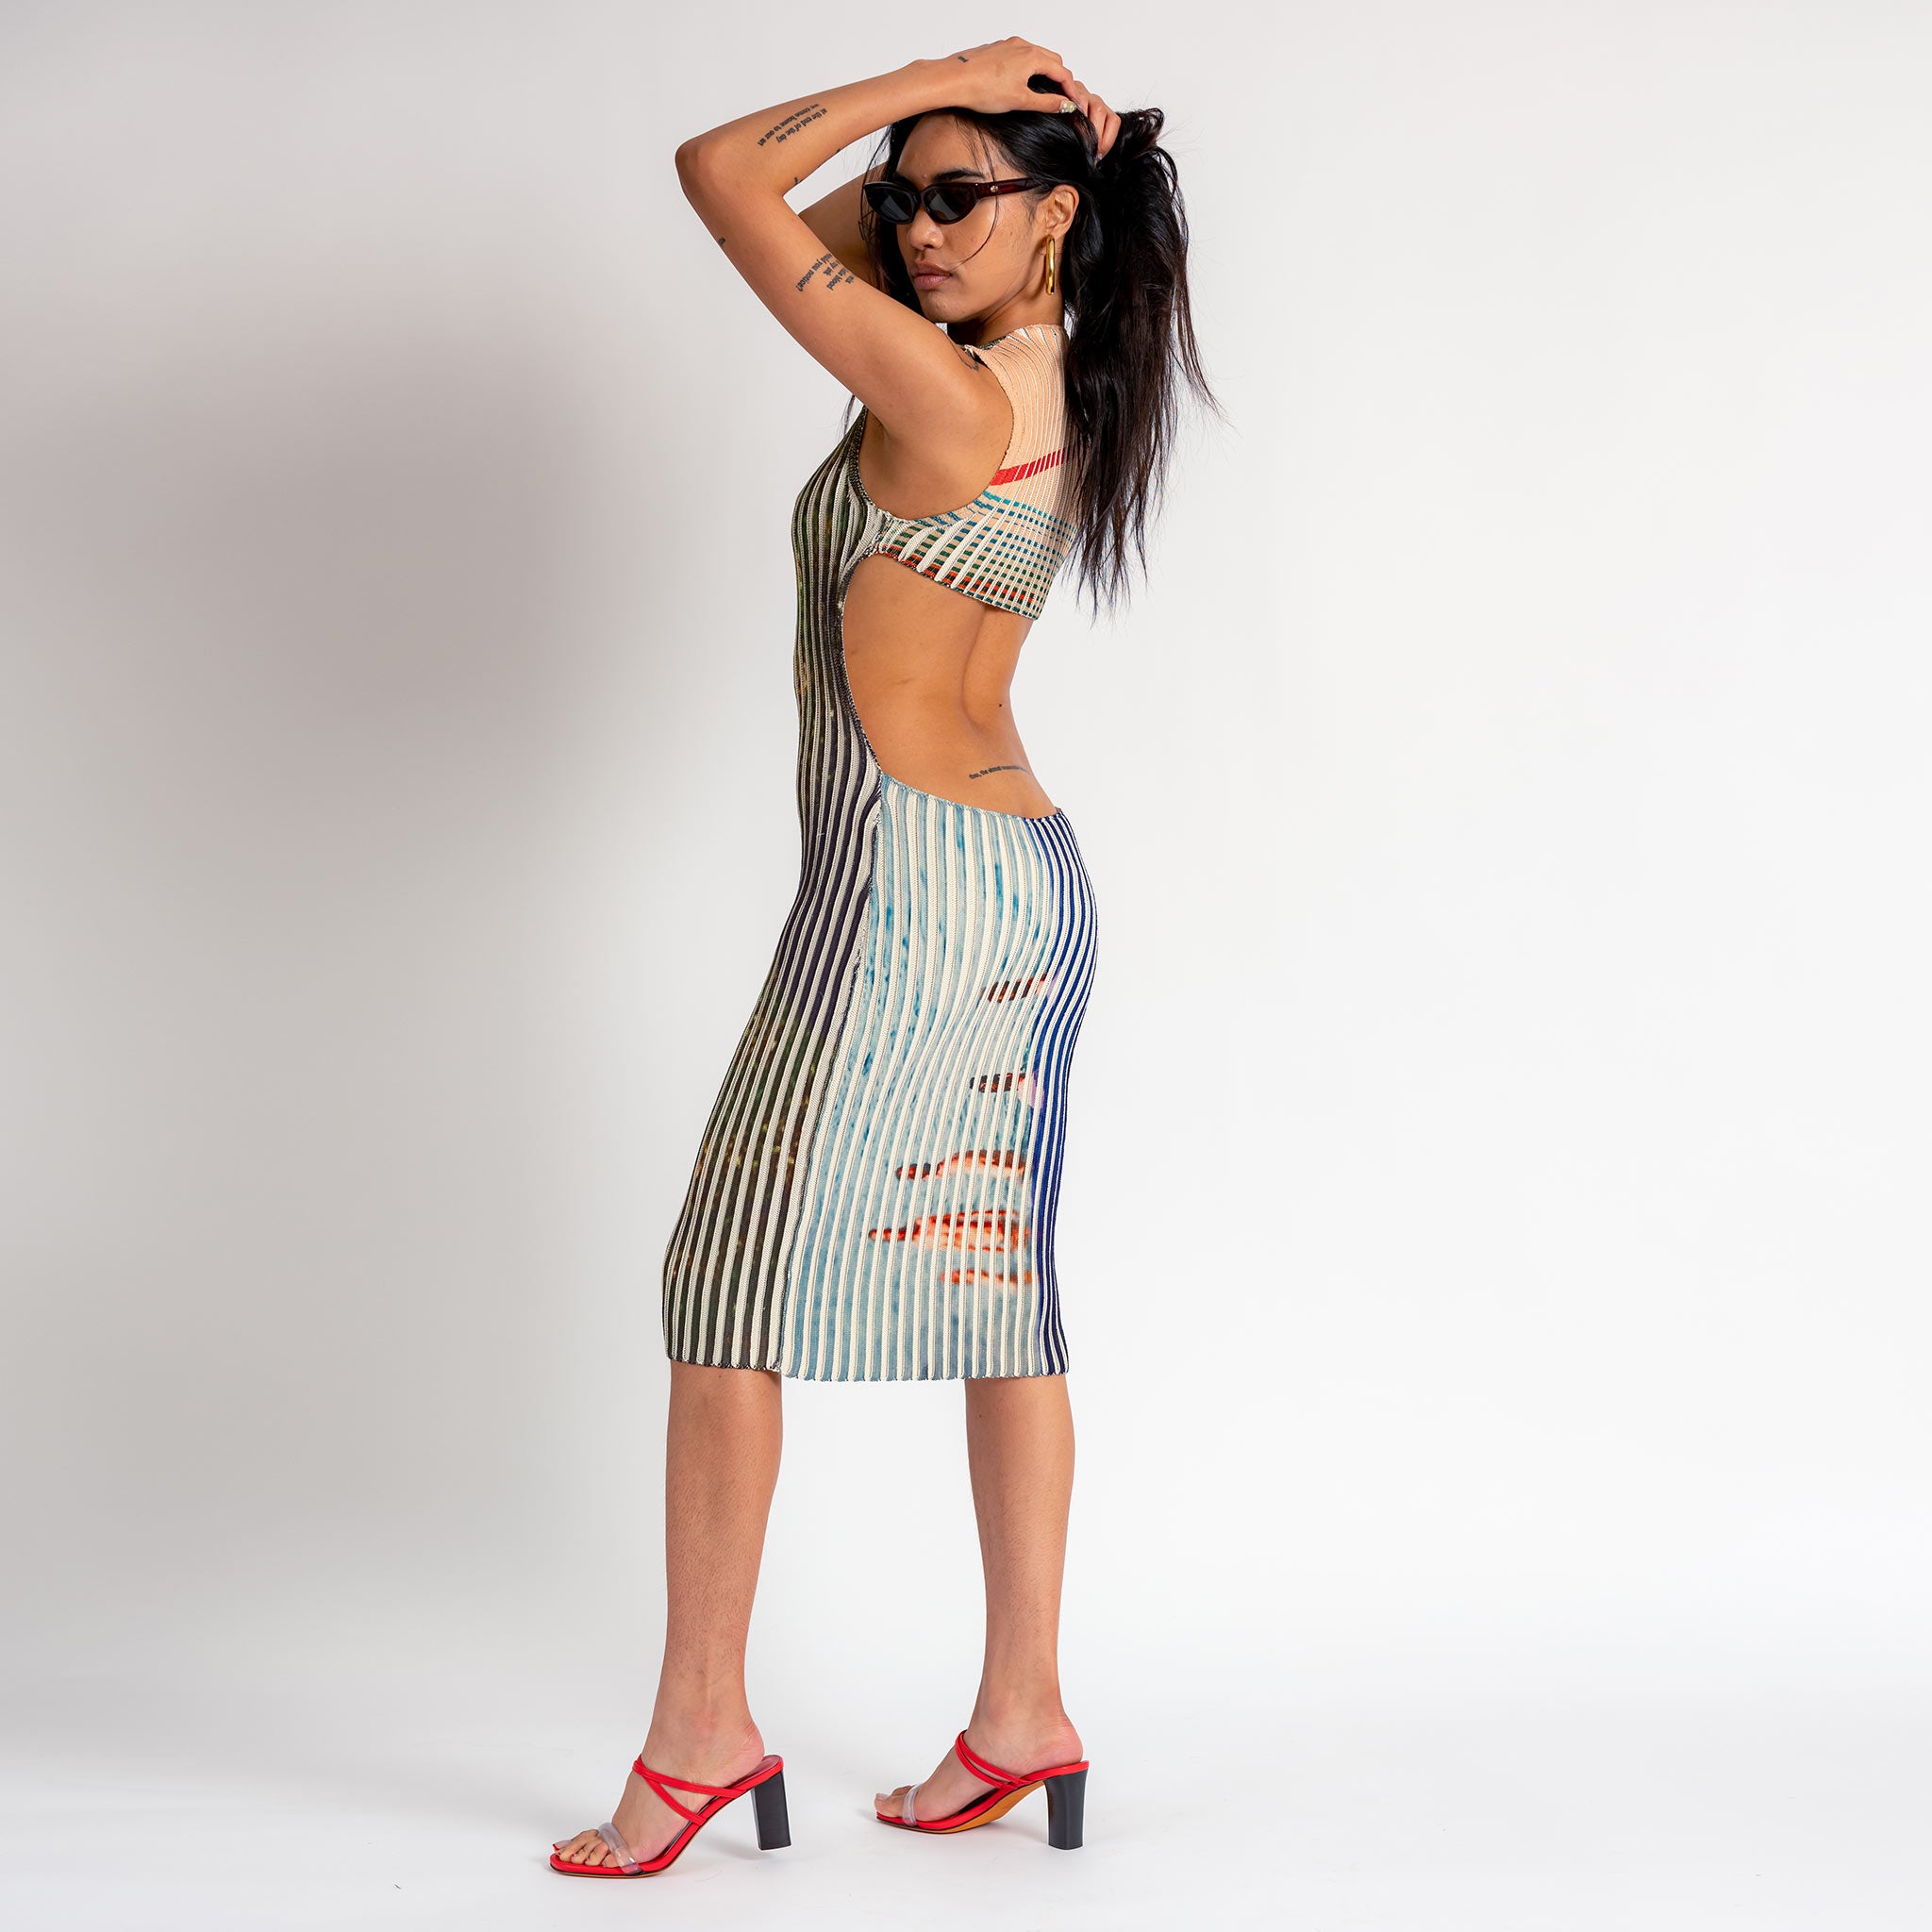 A model shows the back cutout of the sleeveless printed ribbed Ribboned Dress by Eckhaus Latta, which falls below the knee.